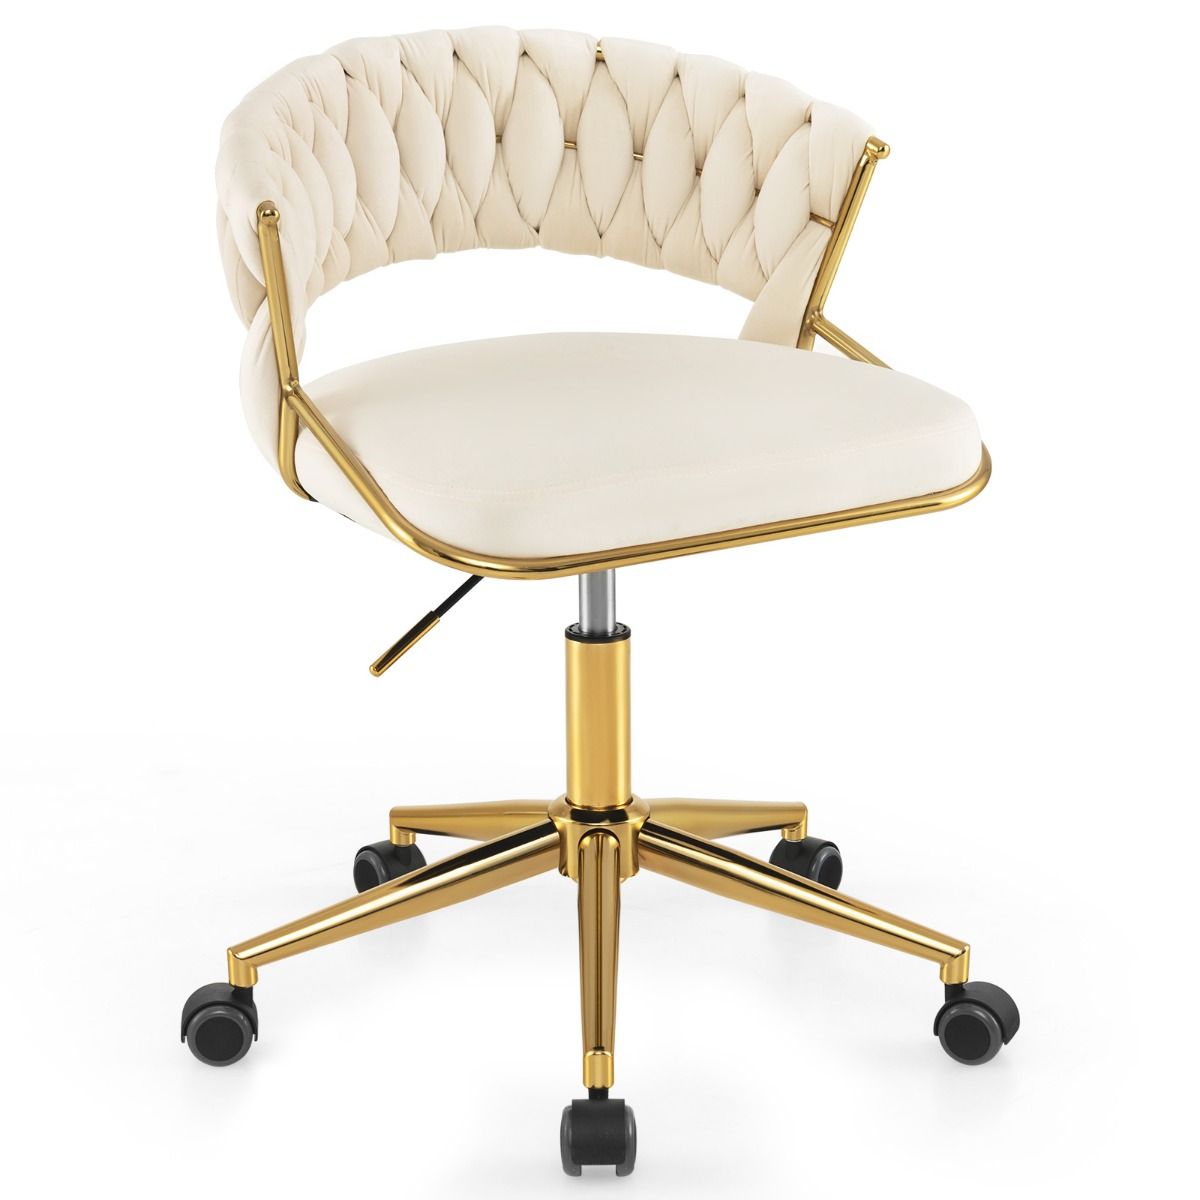 Home Office Desk Chair with Hand-woven Back and Golden Metal Legs White